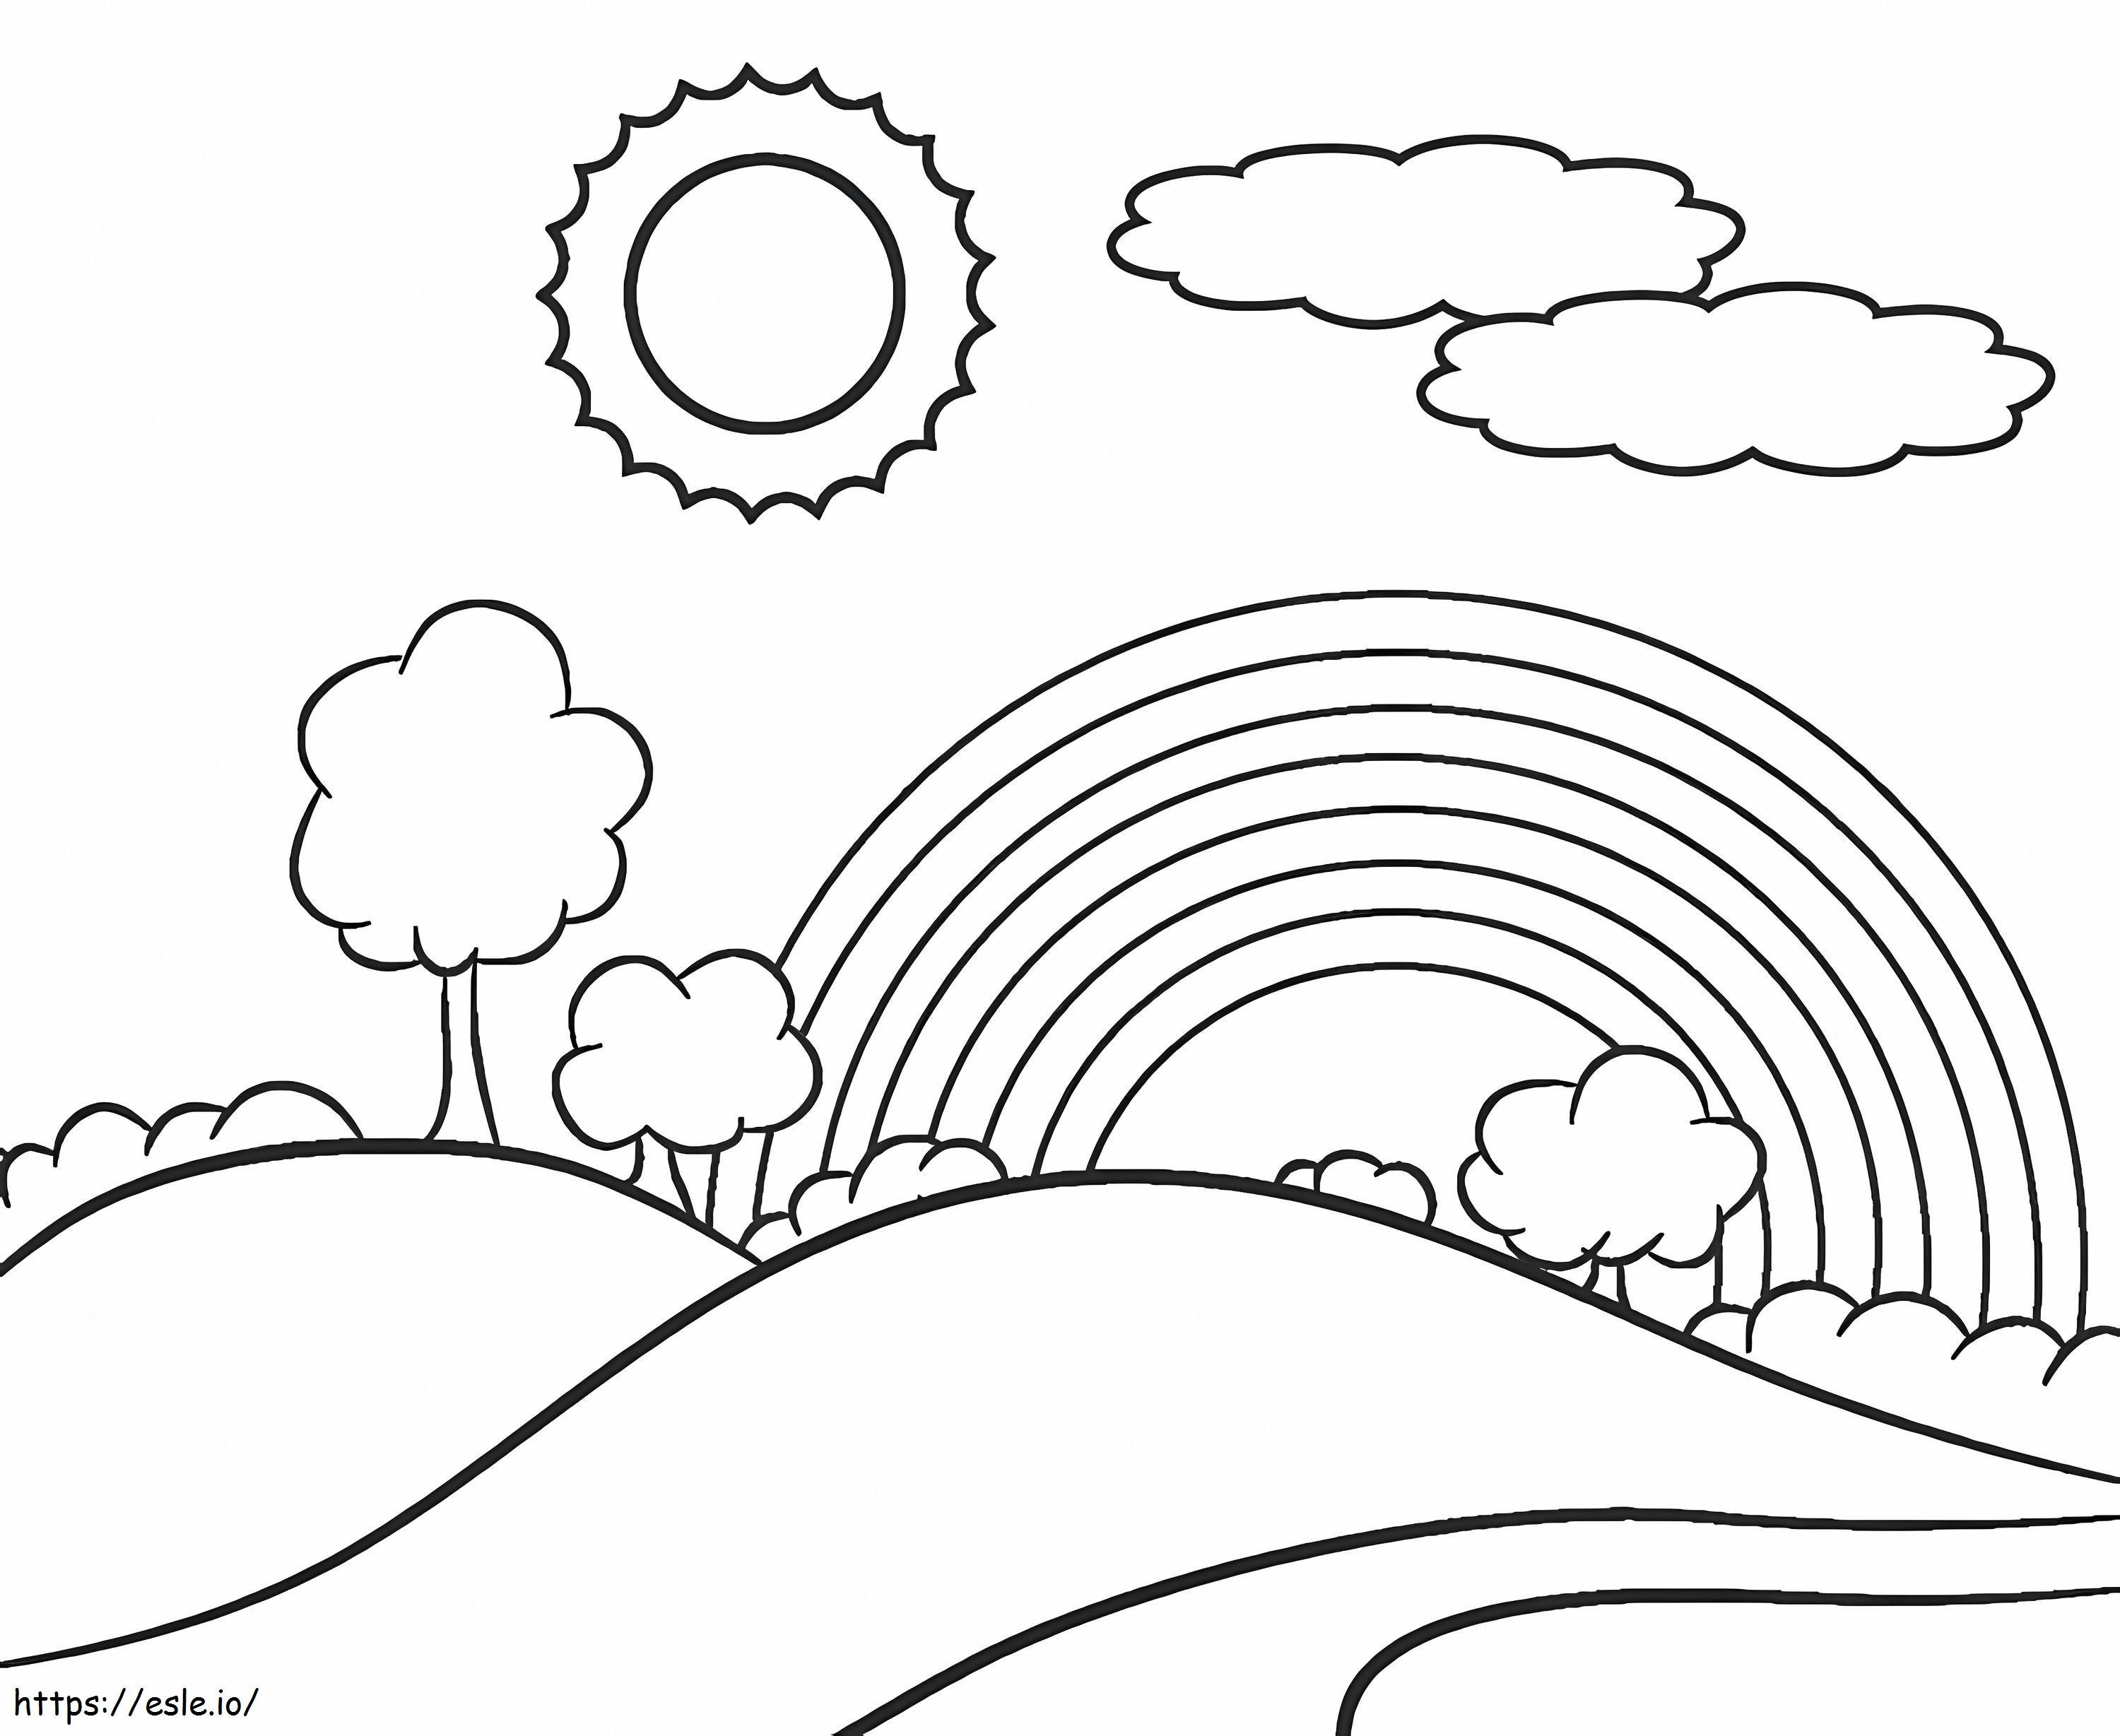 Rainbow Coloring Page 5 coloring page